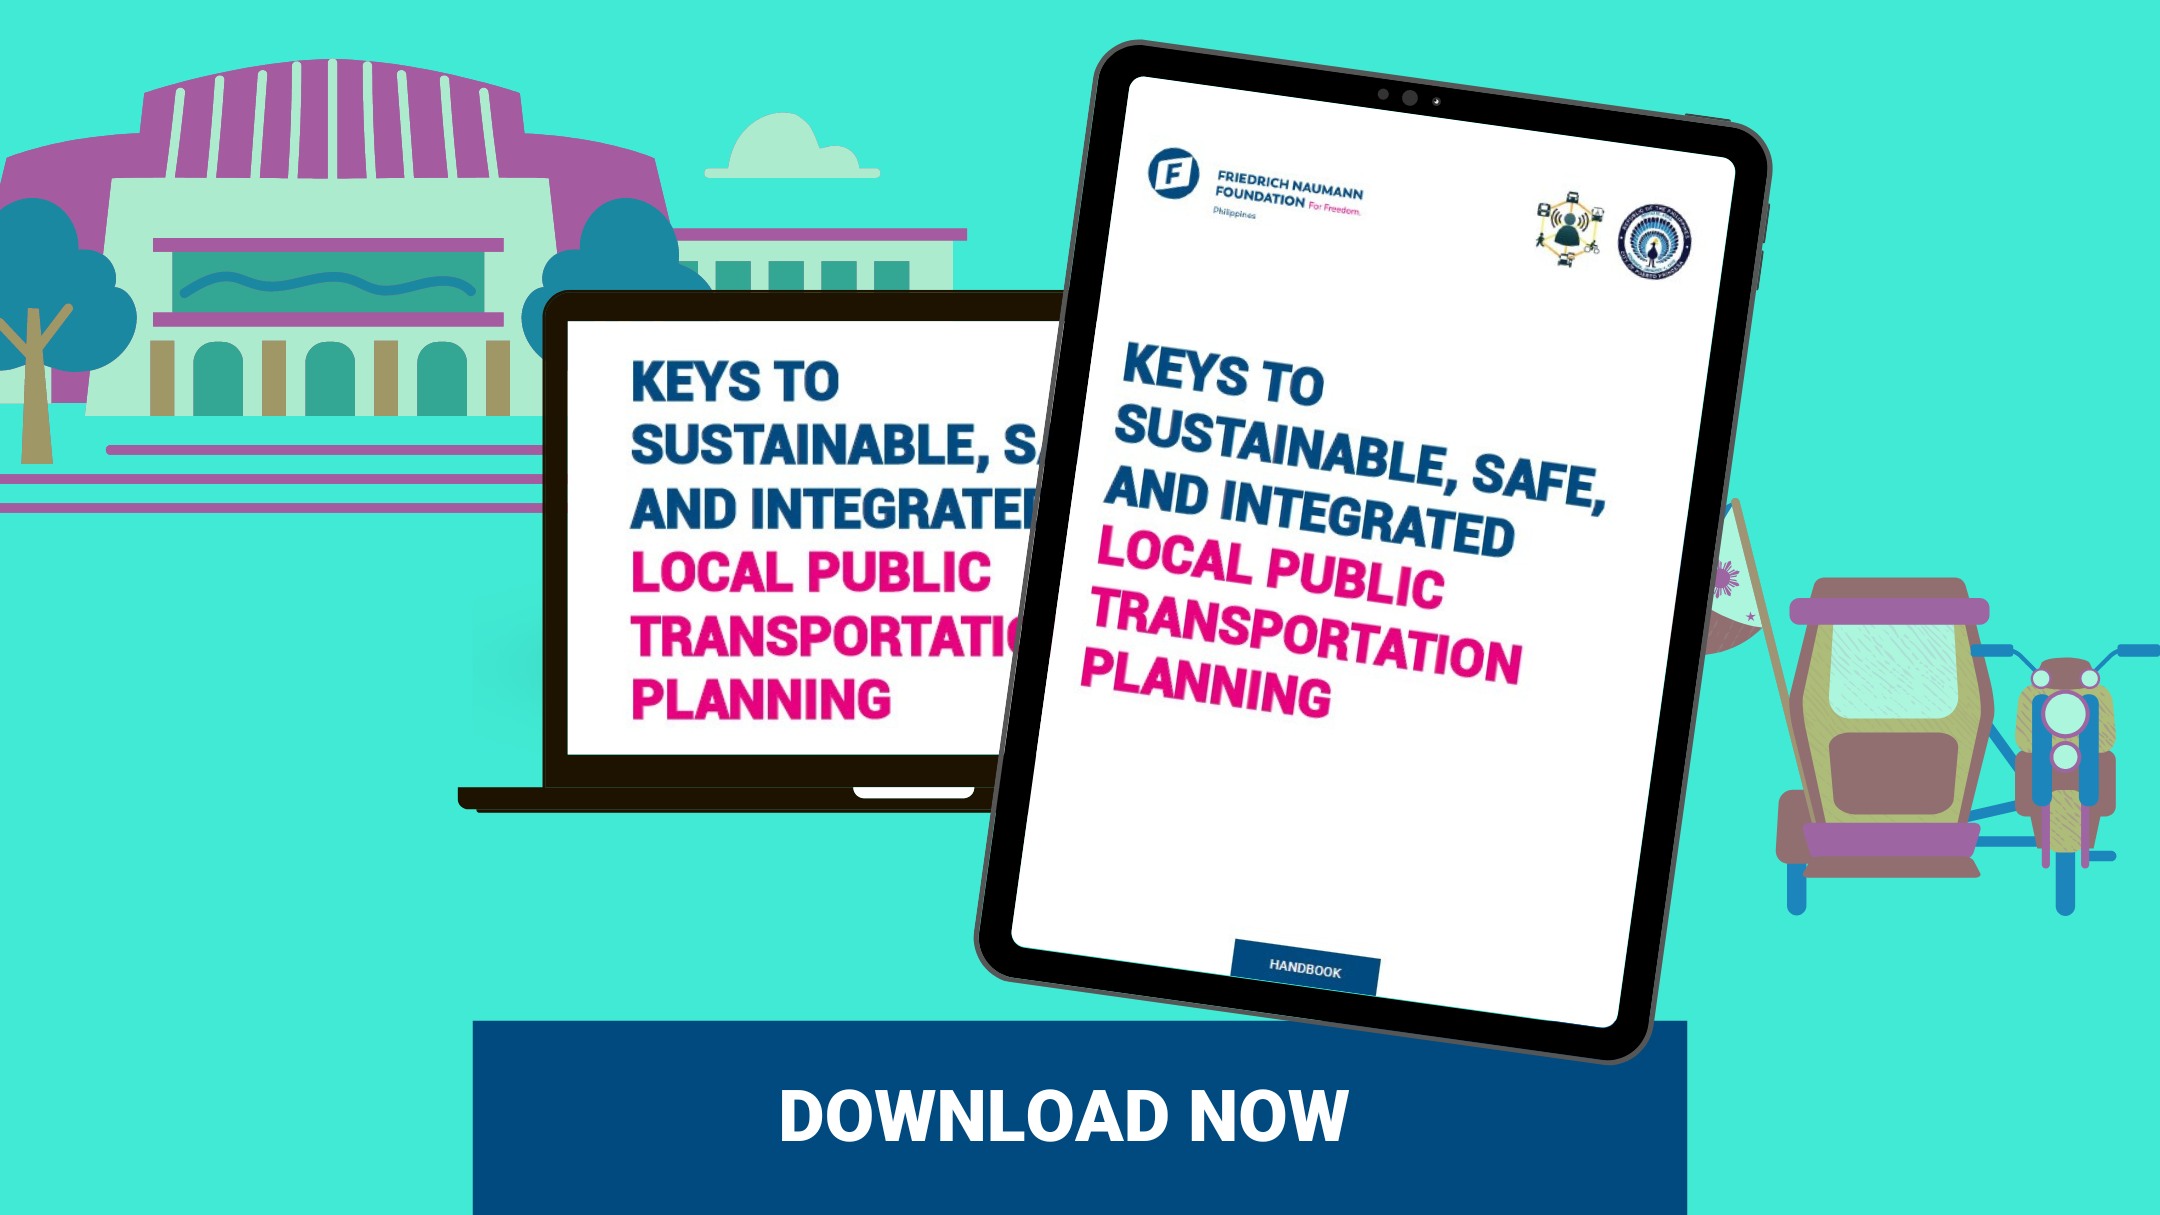 KEYS TO SUSTAINABLE TRANSPORT PLANNING